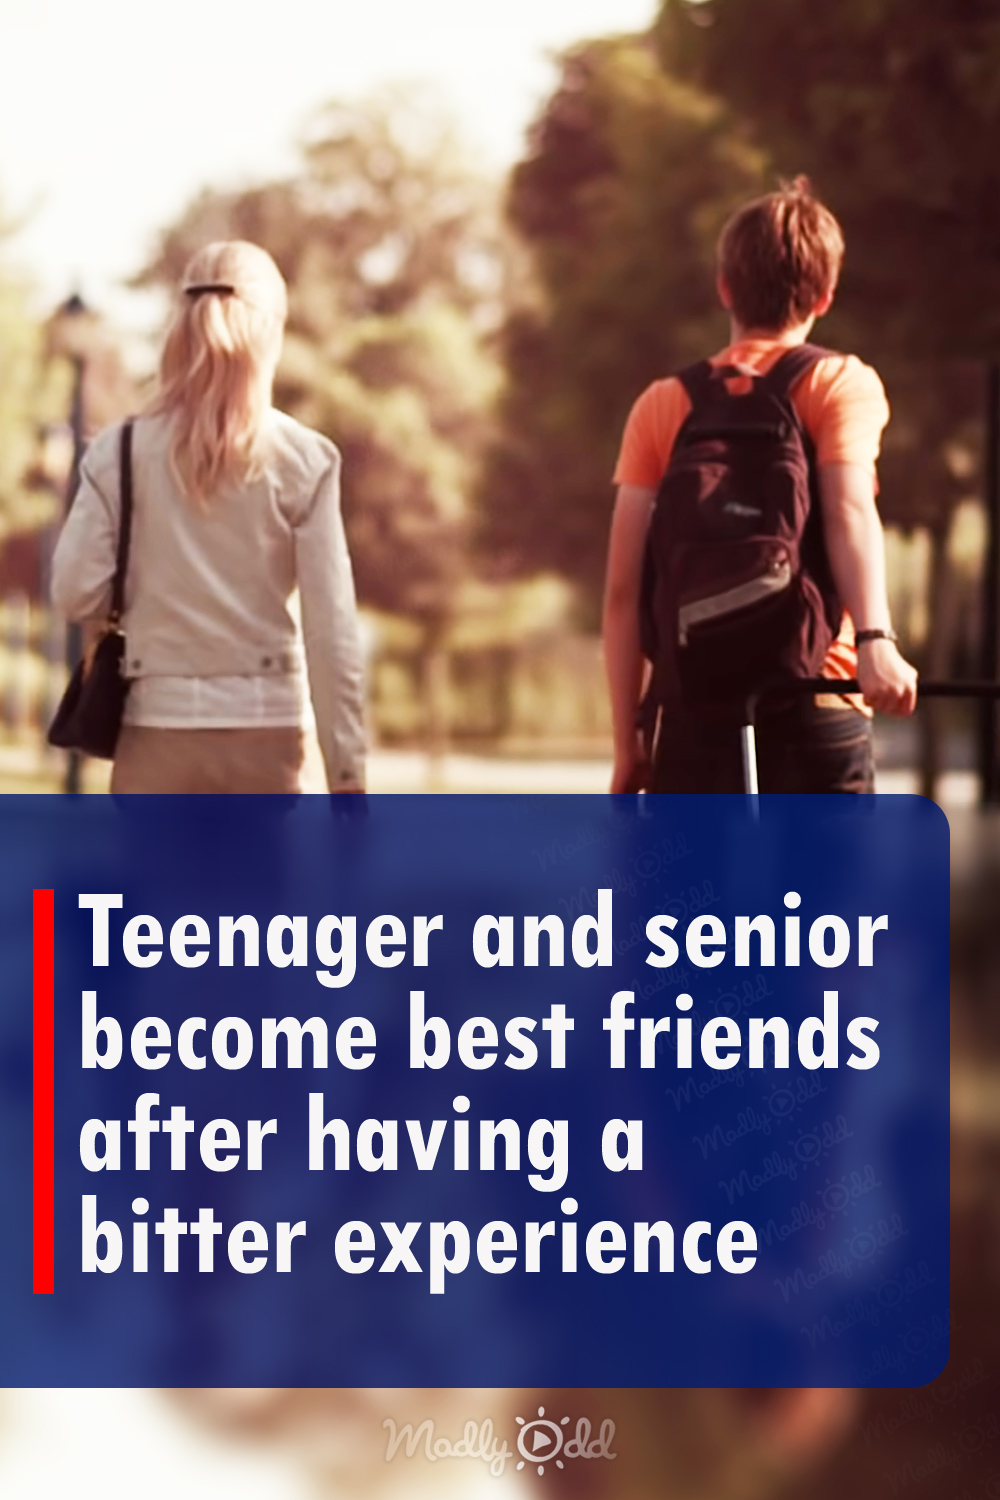 Teenager and senior become best friends after having a bitter experience